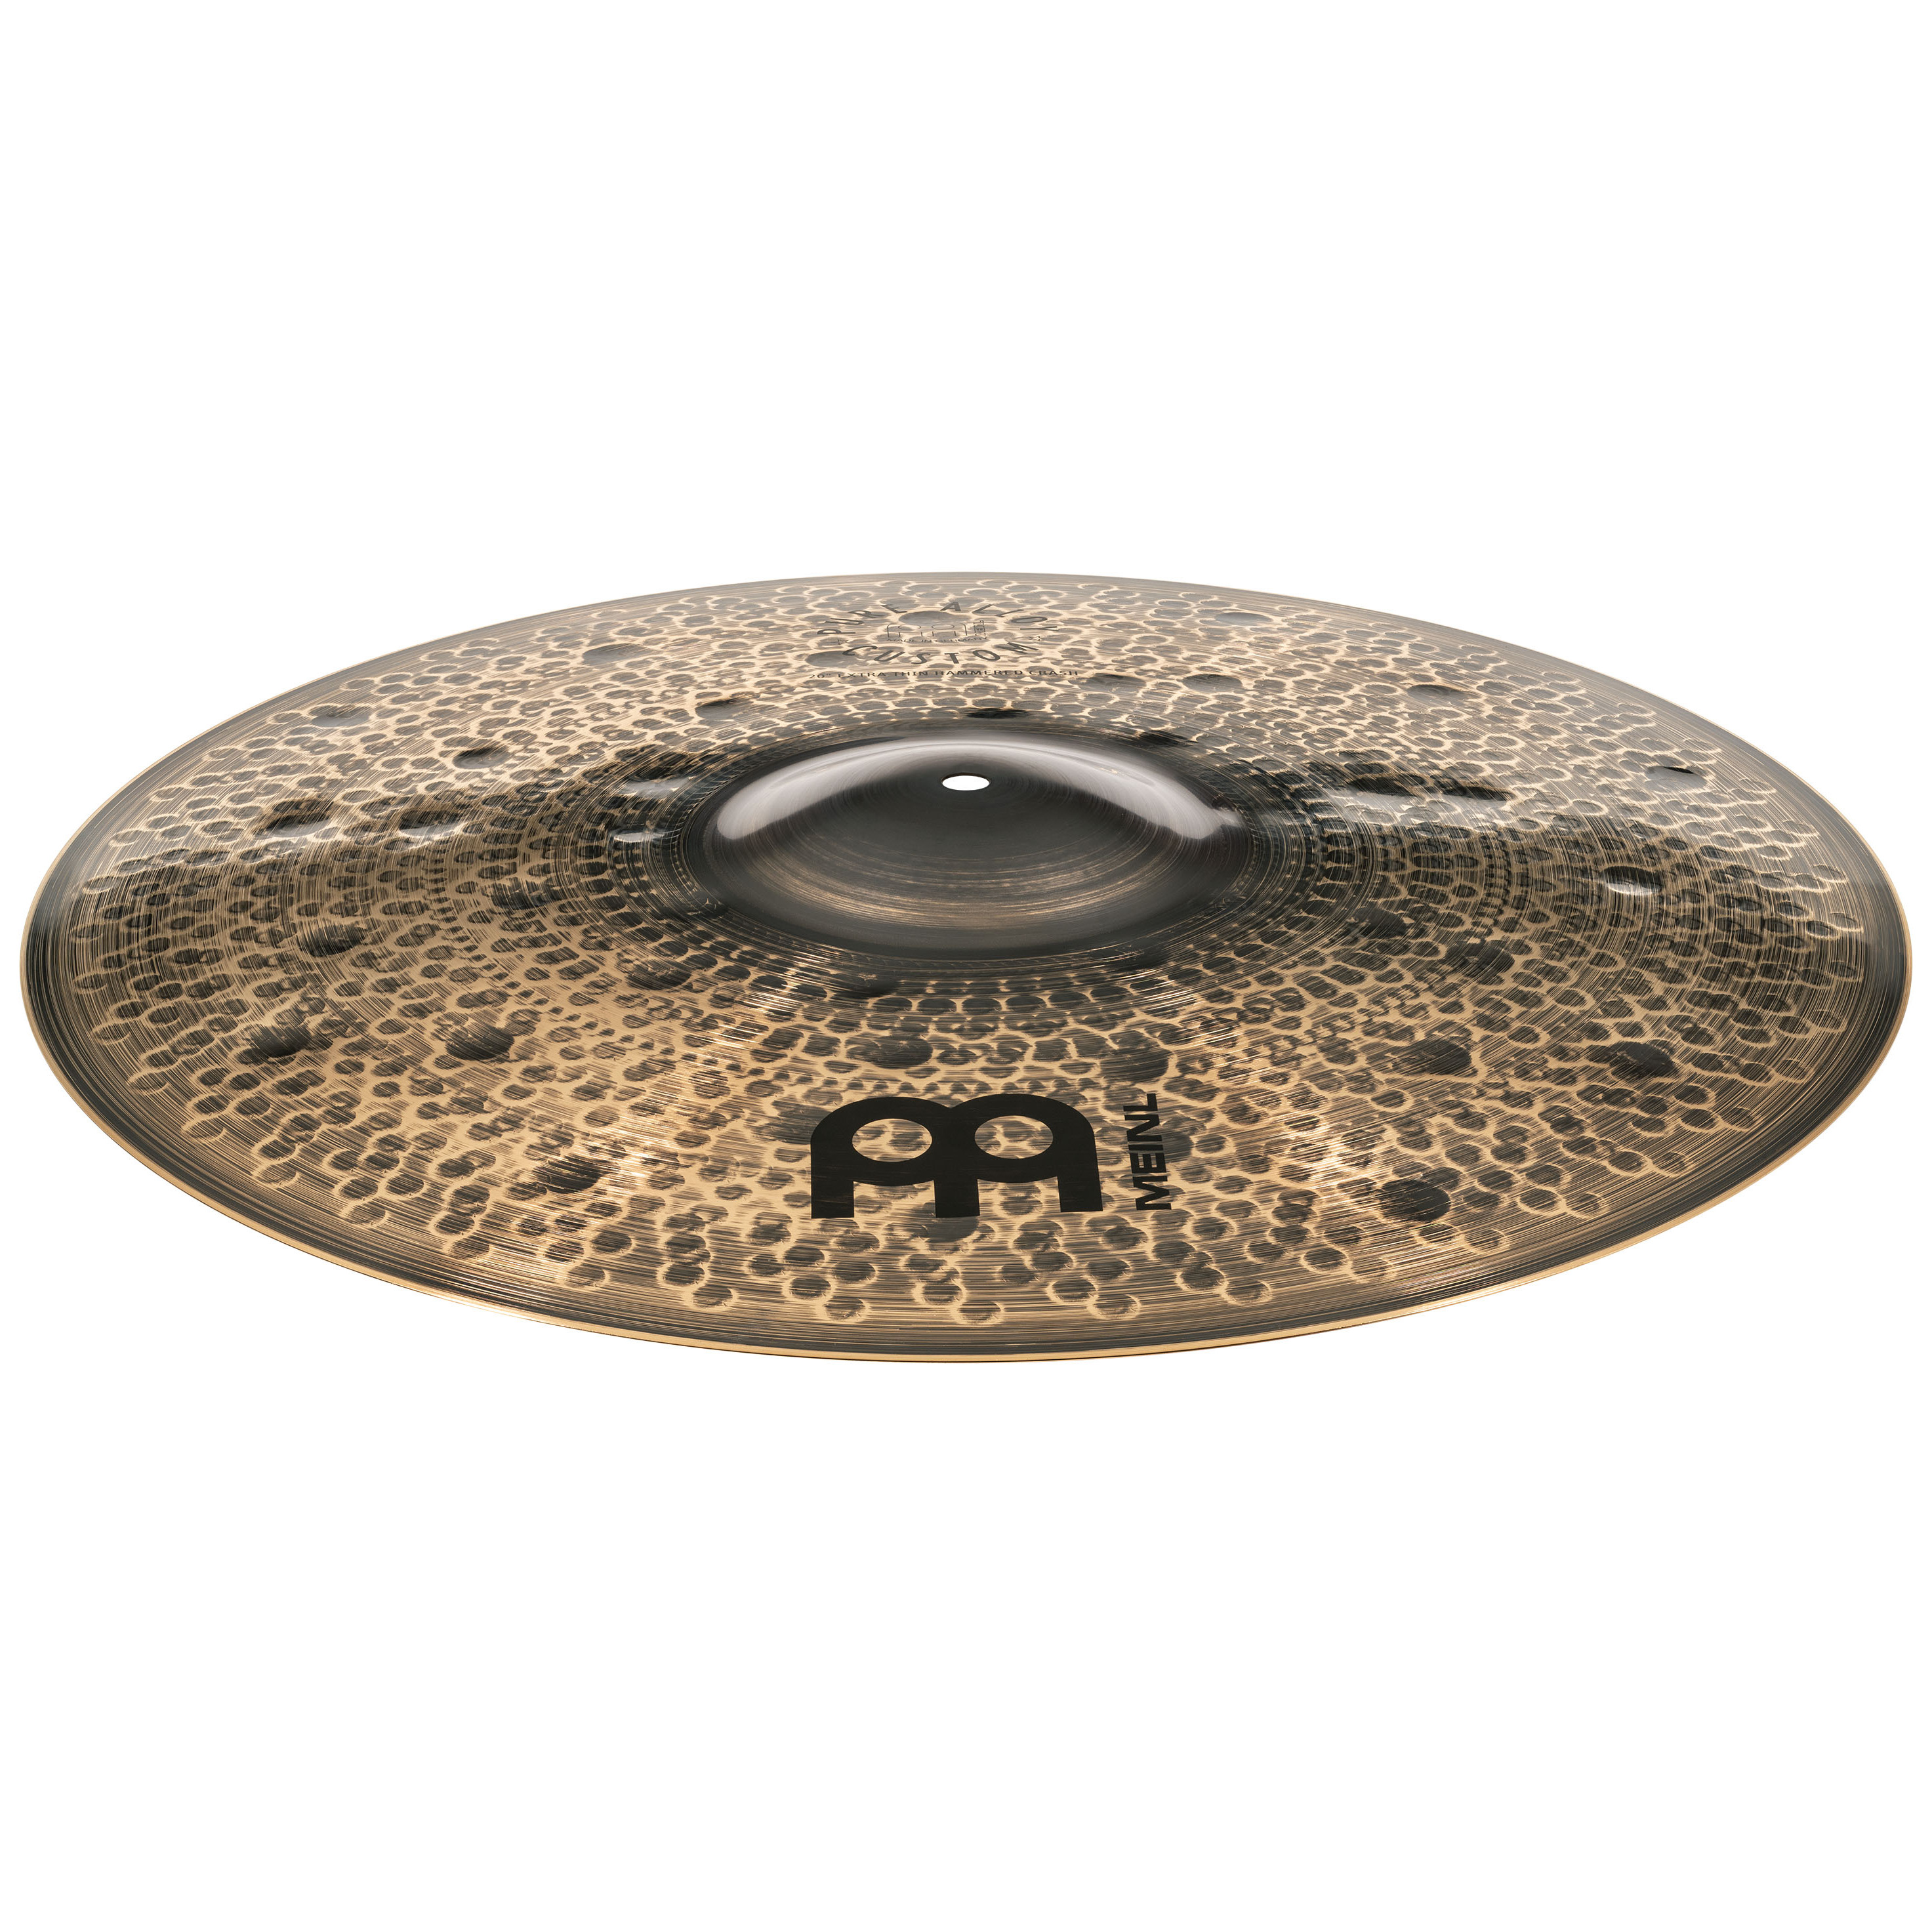 Meinl Cymbals PAC20ETHC - 20" Pure Alloy Custom Extra Thin Hammered Crash 2